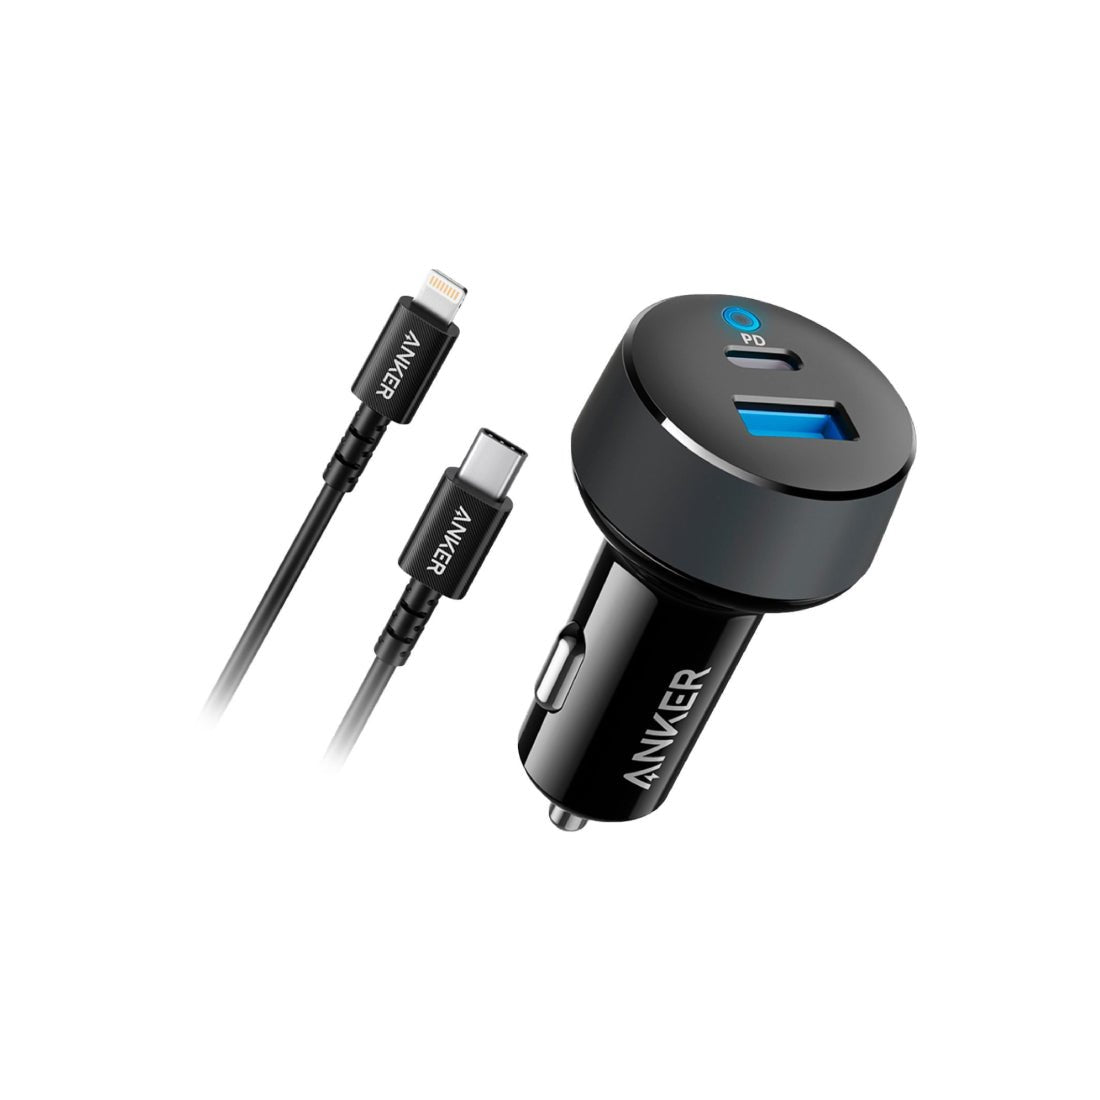 Anker PowerDrive Classic PD 2 With Charging Cable - كابل - Store 974 | ستور ٩٧٤